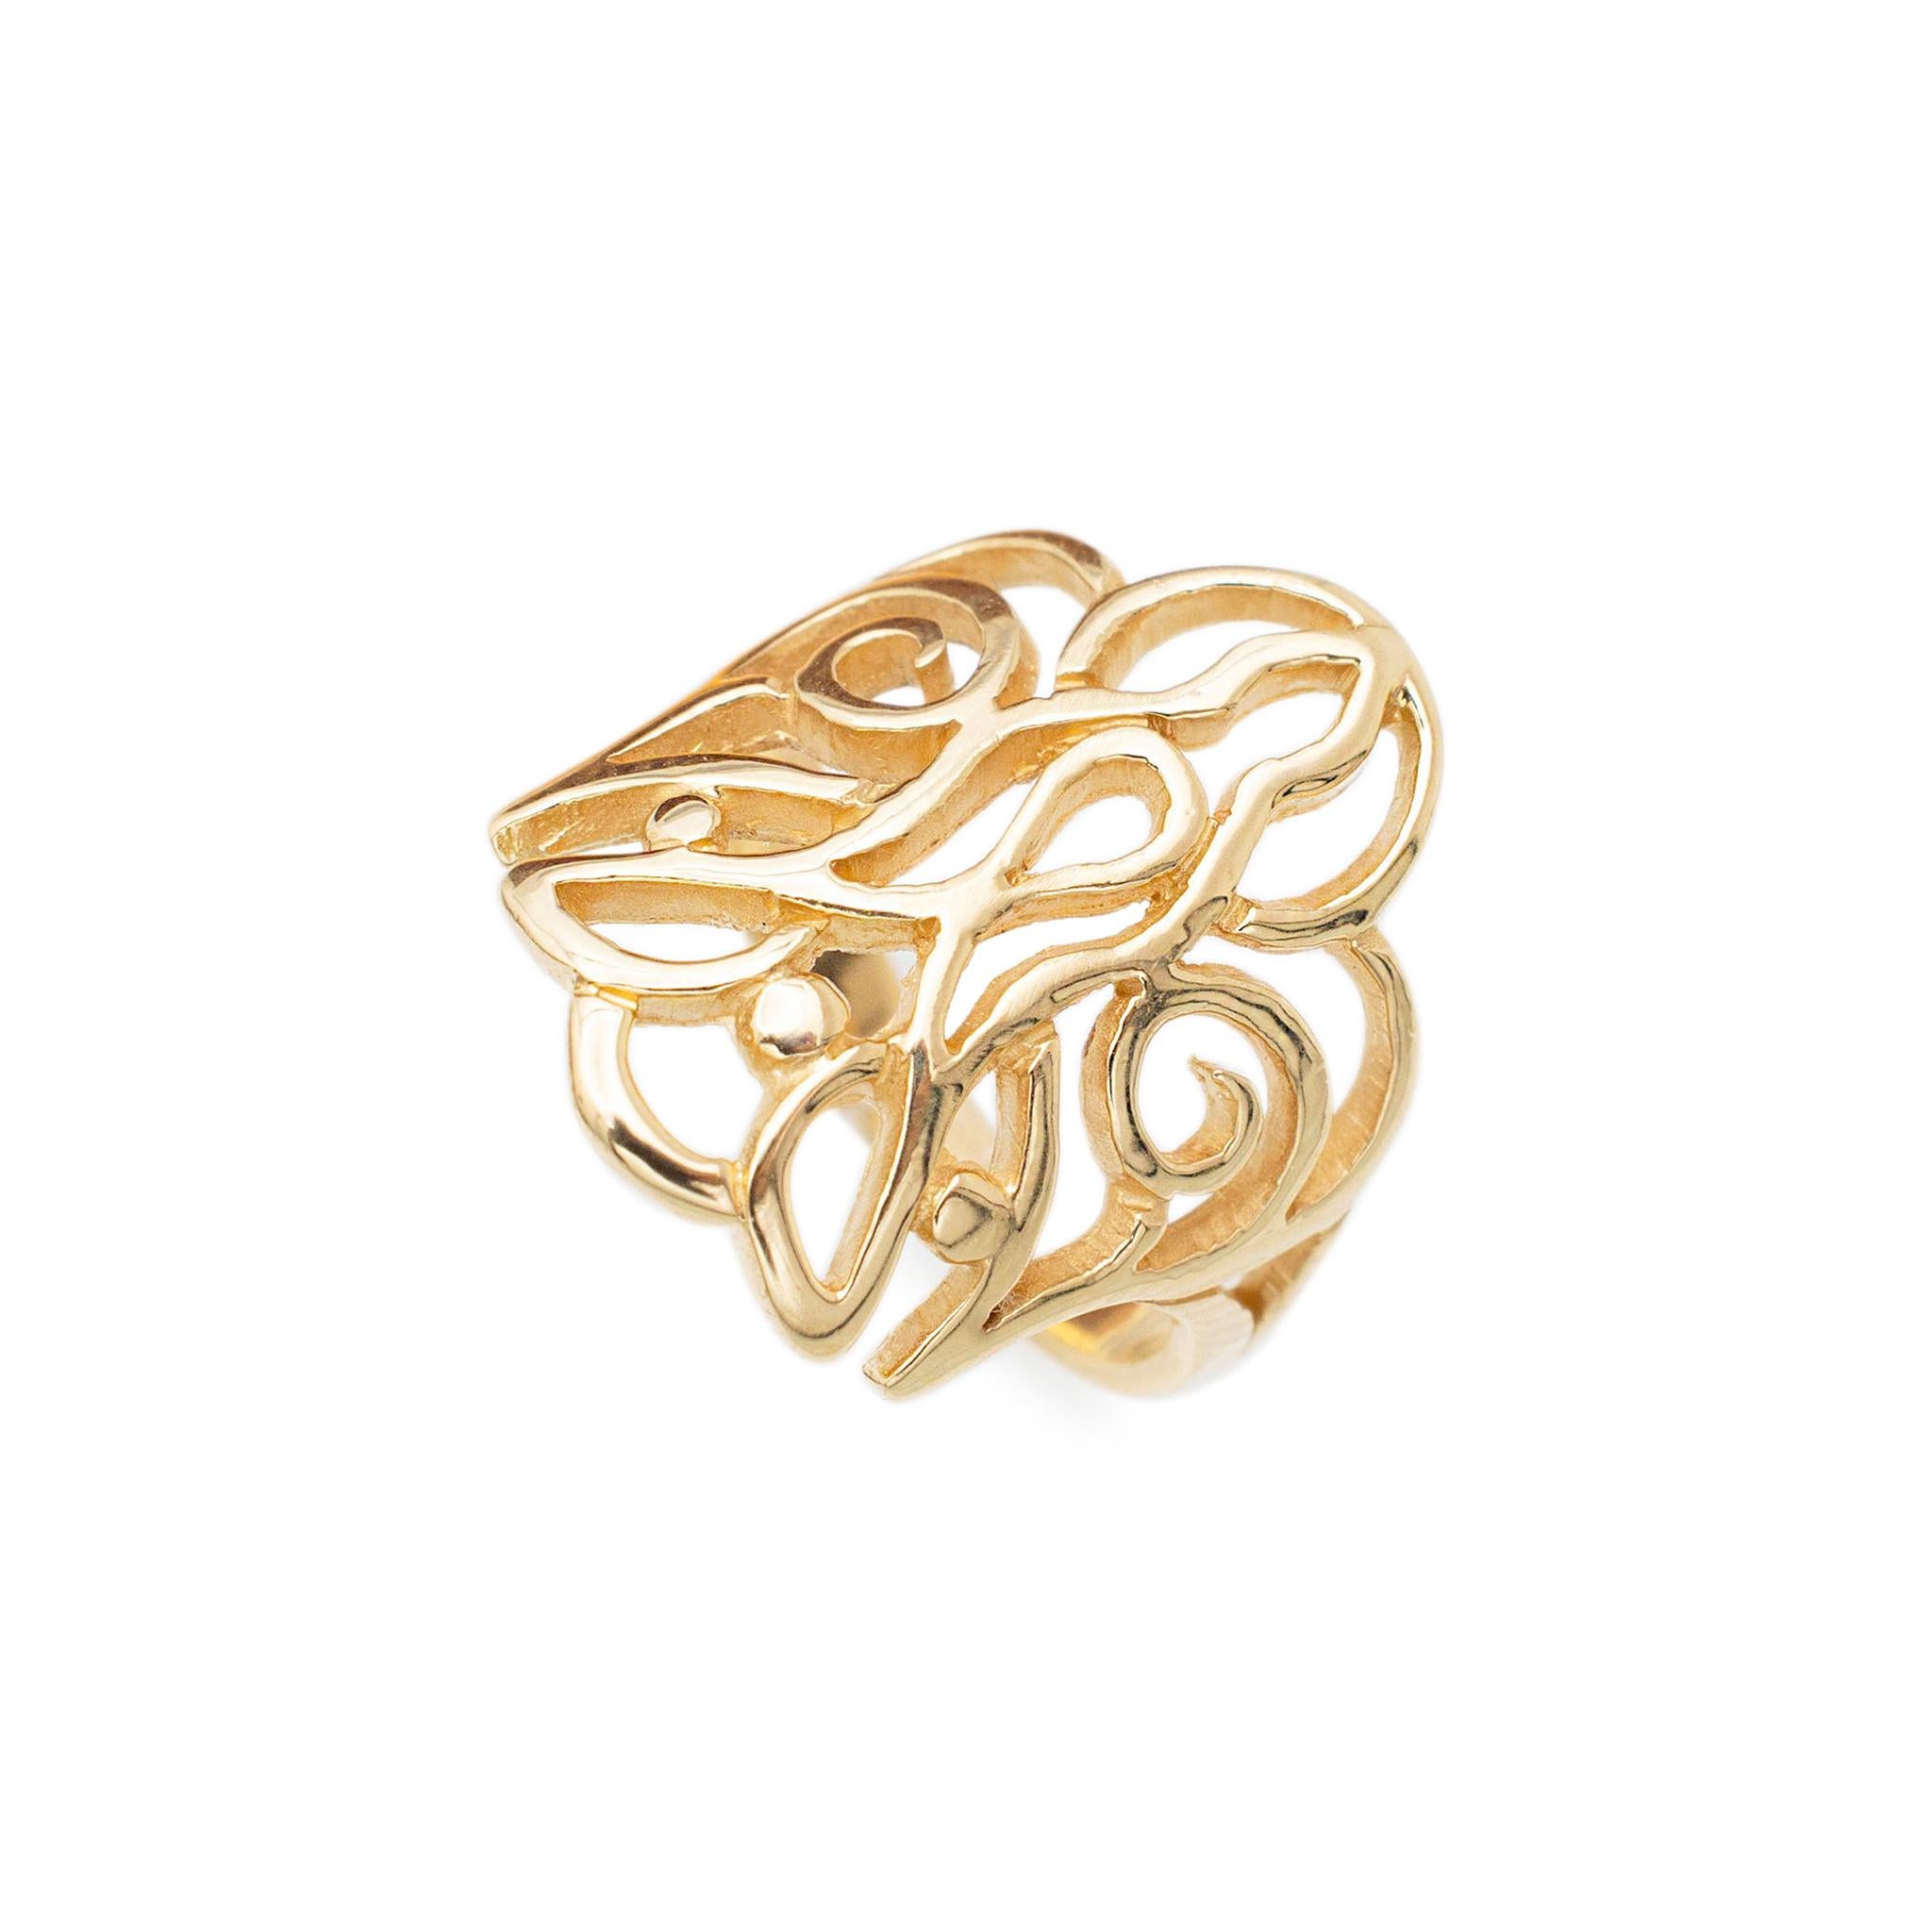 Brand: James Avery

Gender: Unisex

Metal Type: 14K Yellow Gold

Ring Size: 5 

Width: 19.50 mm tapering to 2.80 mm

Total weight: 4.30 grams

14K Yellow Gold cocktail ring with a half round shank. The metal was tested and determined to be 14K